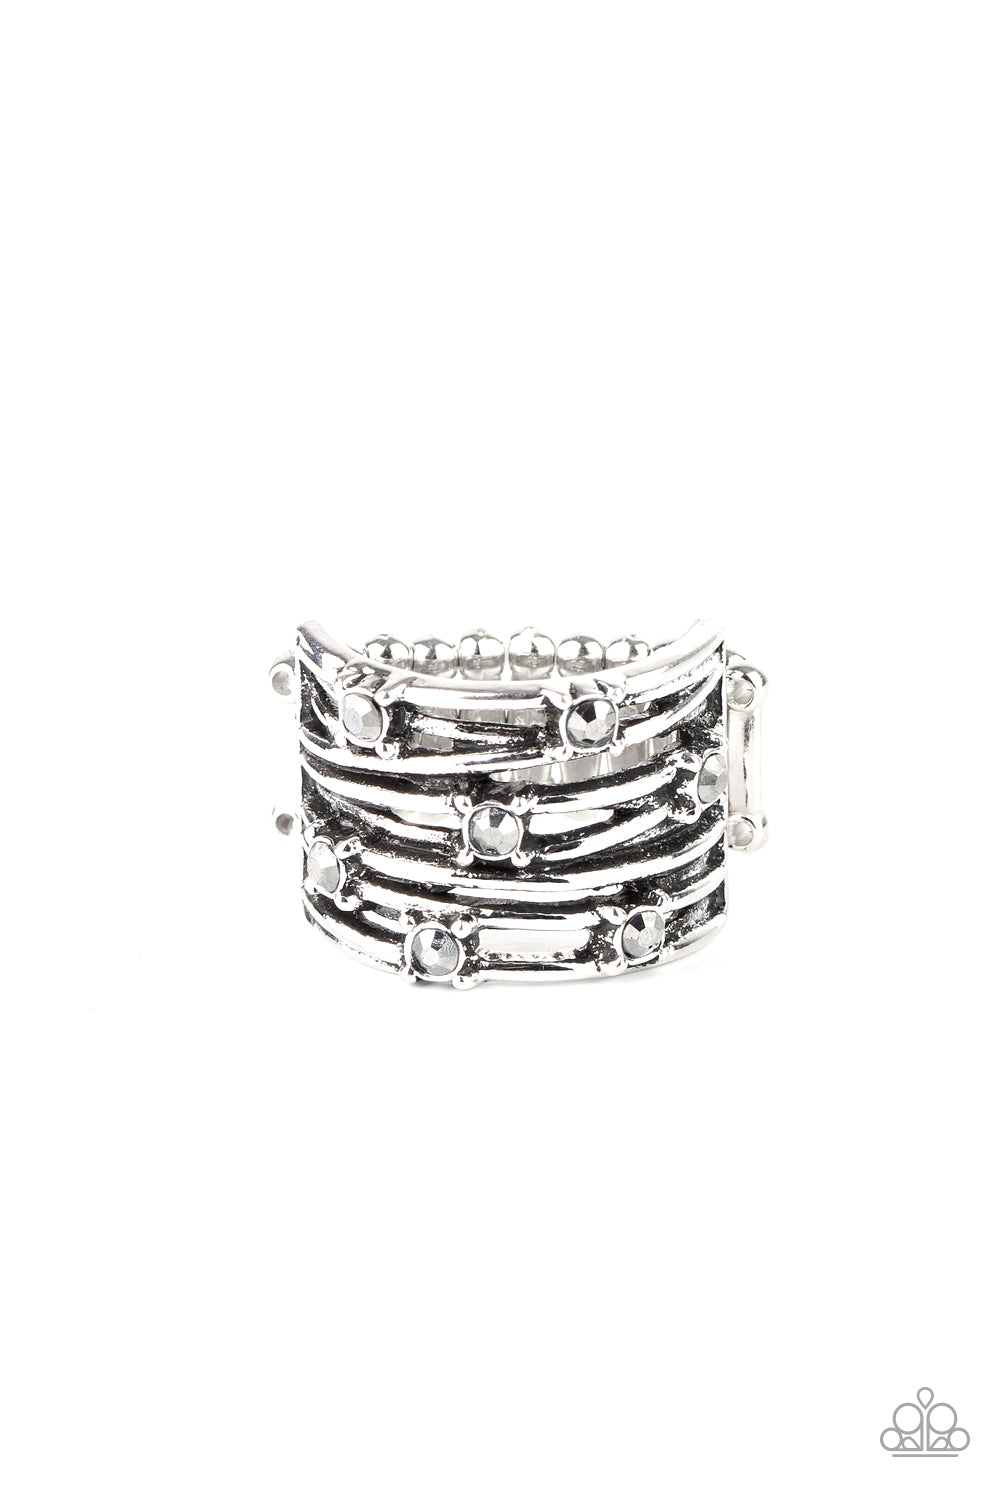 Revved Up Radiance - silver - Paparazzi ring – JewelryBlingThing